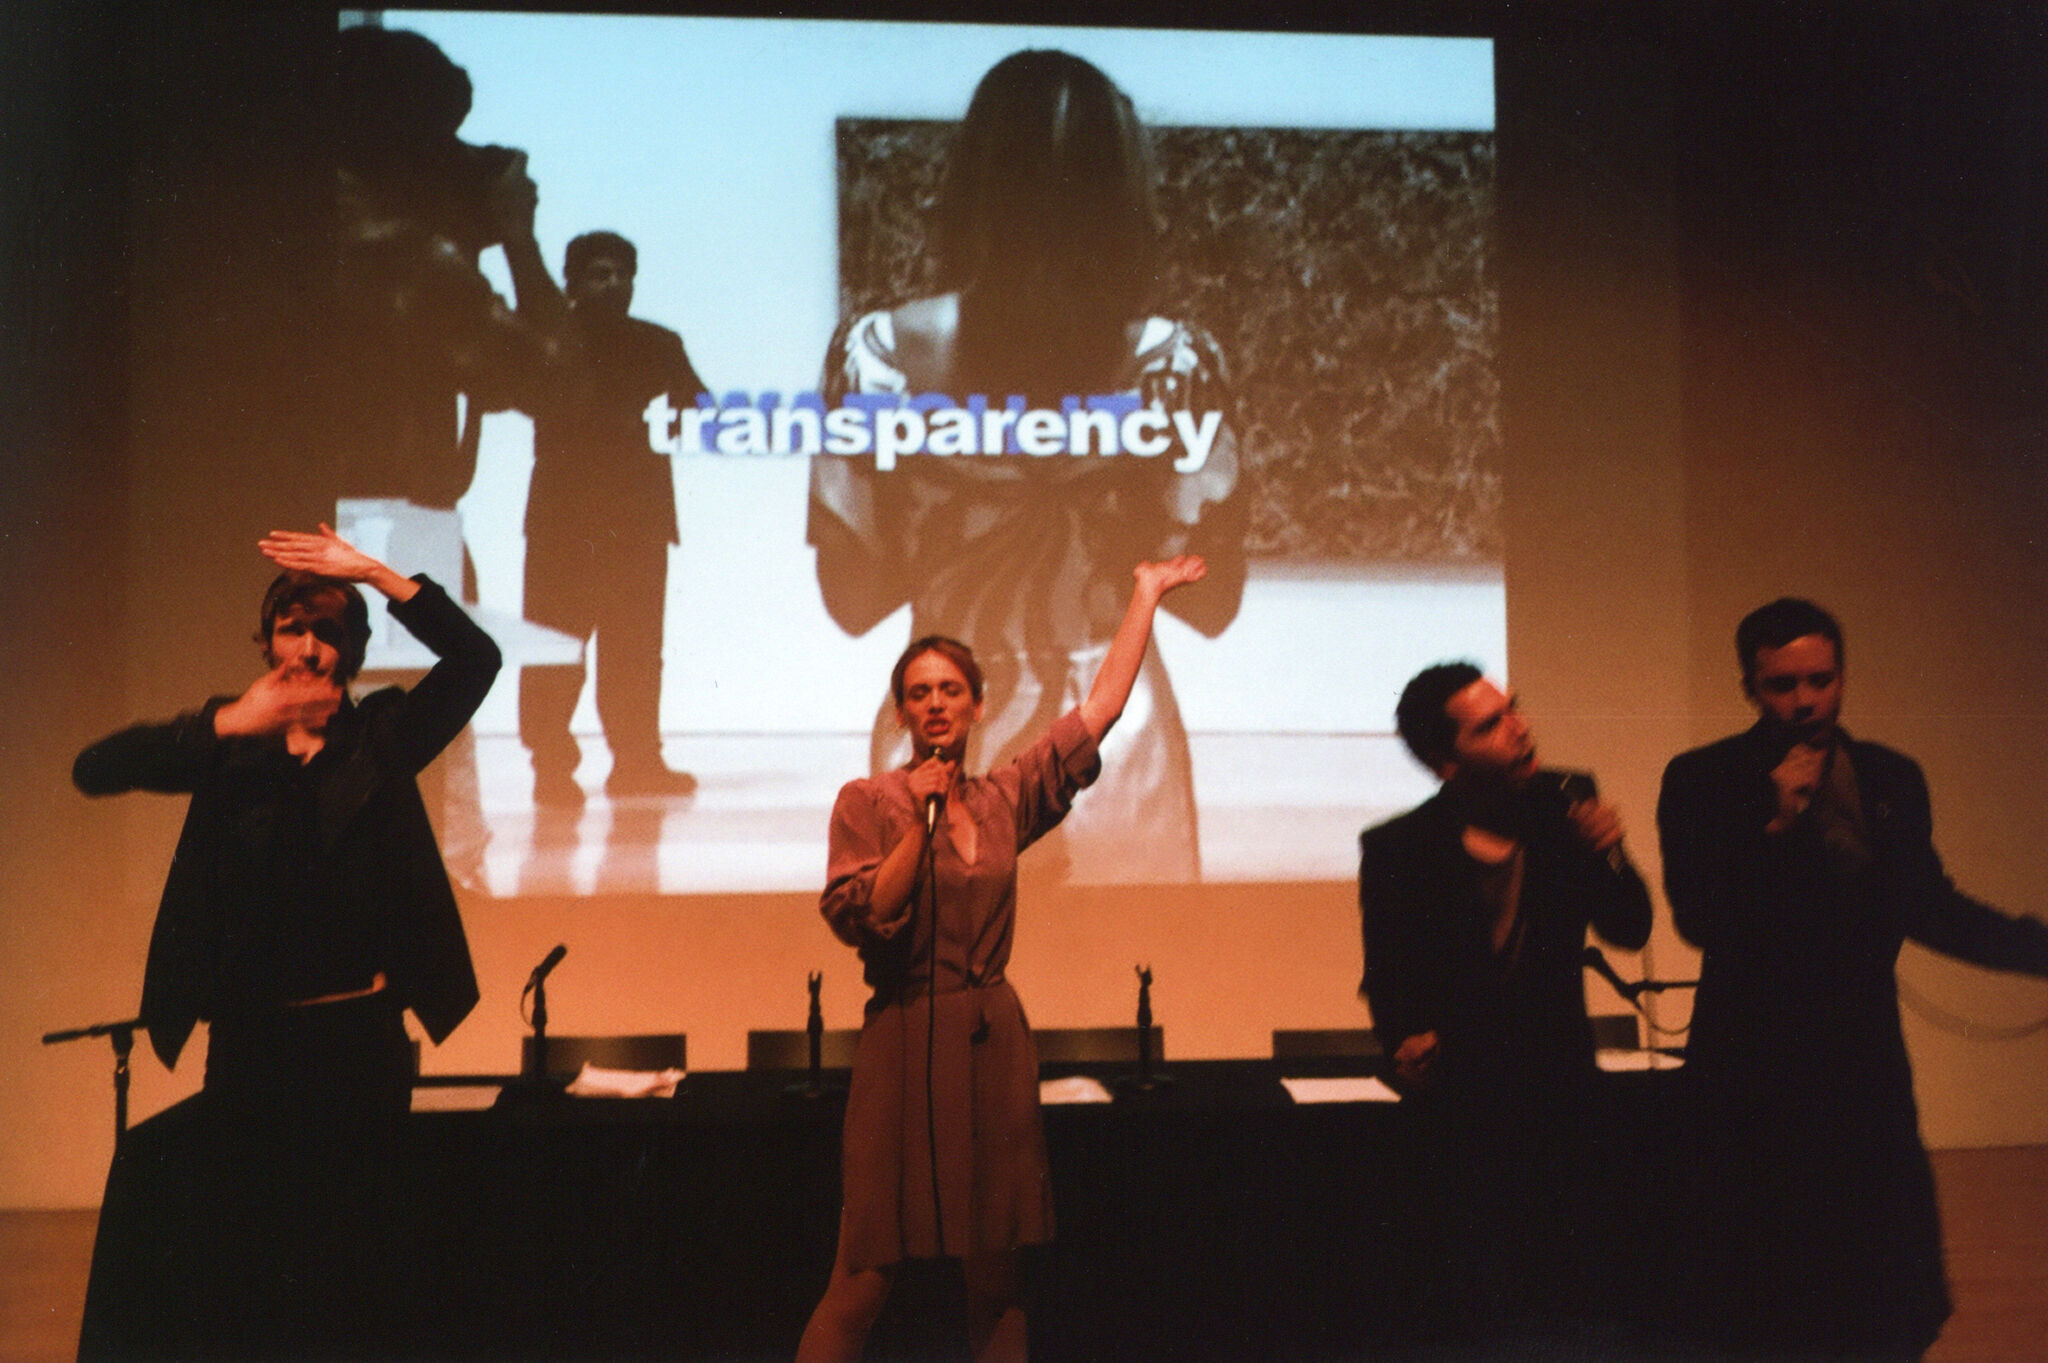 Four people performing in front of a projected screen.